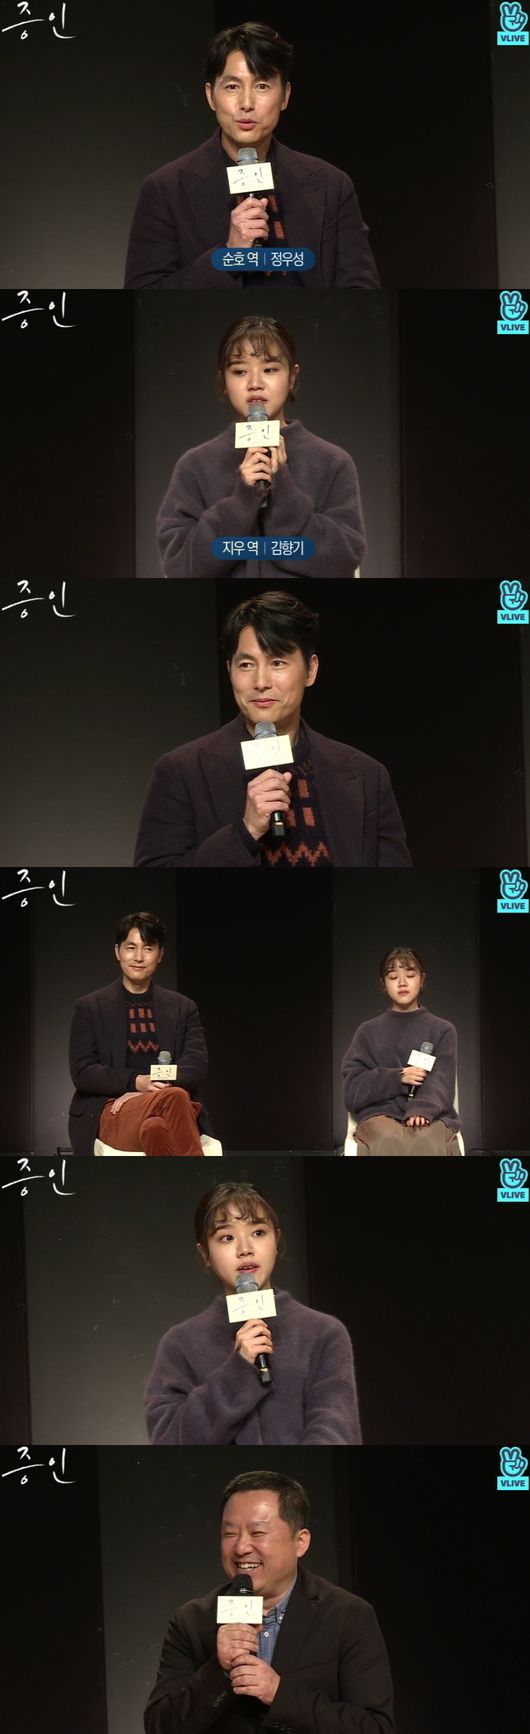 Actor Jung Woo-sung laughed at the movie Innocent Witness by mentioning self-pureness.In VLove Live!, which was broadcast on the 21st, Actor Jung Woo-sung, Kim Hyang Gi, director Lee Hans Innocent Witness movie talk was drawn.On this day, MC Park Kyung-rim said, Today, there were various favorable comments such as no pollution clean movie, soul purification project, wave of true communication, powerless Jung Woo-sung, and Kim Hyang Gi. And I introduced director Lee Han.Lee said, It is good about the hot reaction.I can say that the lawyer who lived in the age is a story to meet a girl named Ji-woo who has lived in a different life and environment as she takes charge of the Murder case The Suspect defense.Kim Hyang Gi, who turned 20 this year, said, I first saw the movie that was completed today, he said. I am happy that the first movie of 20 years old is Innocent Witness, which is a warm movie but a lot of laughing codes. I was survival, but today I come out with a pure scent, so it is warm and comfortable. Pure Guizhou, it sparkles, he added, laughing, especially saying, This lawyer is very handsome.Meanwhile, the movie Innocent Witness is a story about a lawyer who has to prove his innocence to the powerful Murder The Suspect, meeting Ji-woo, the only witness to the scene of the incident, and is scheduled to open on February 13th.VLove Live! Captures the broadcast screen